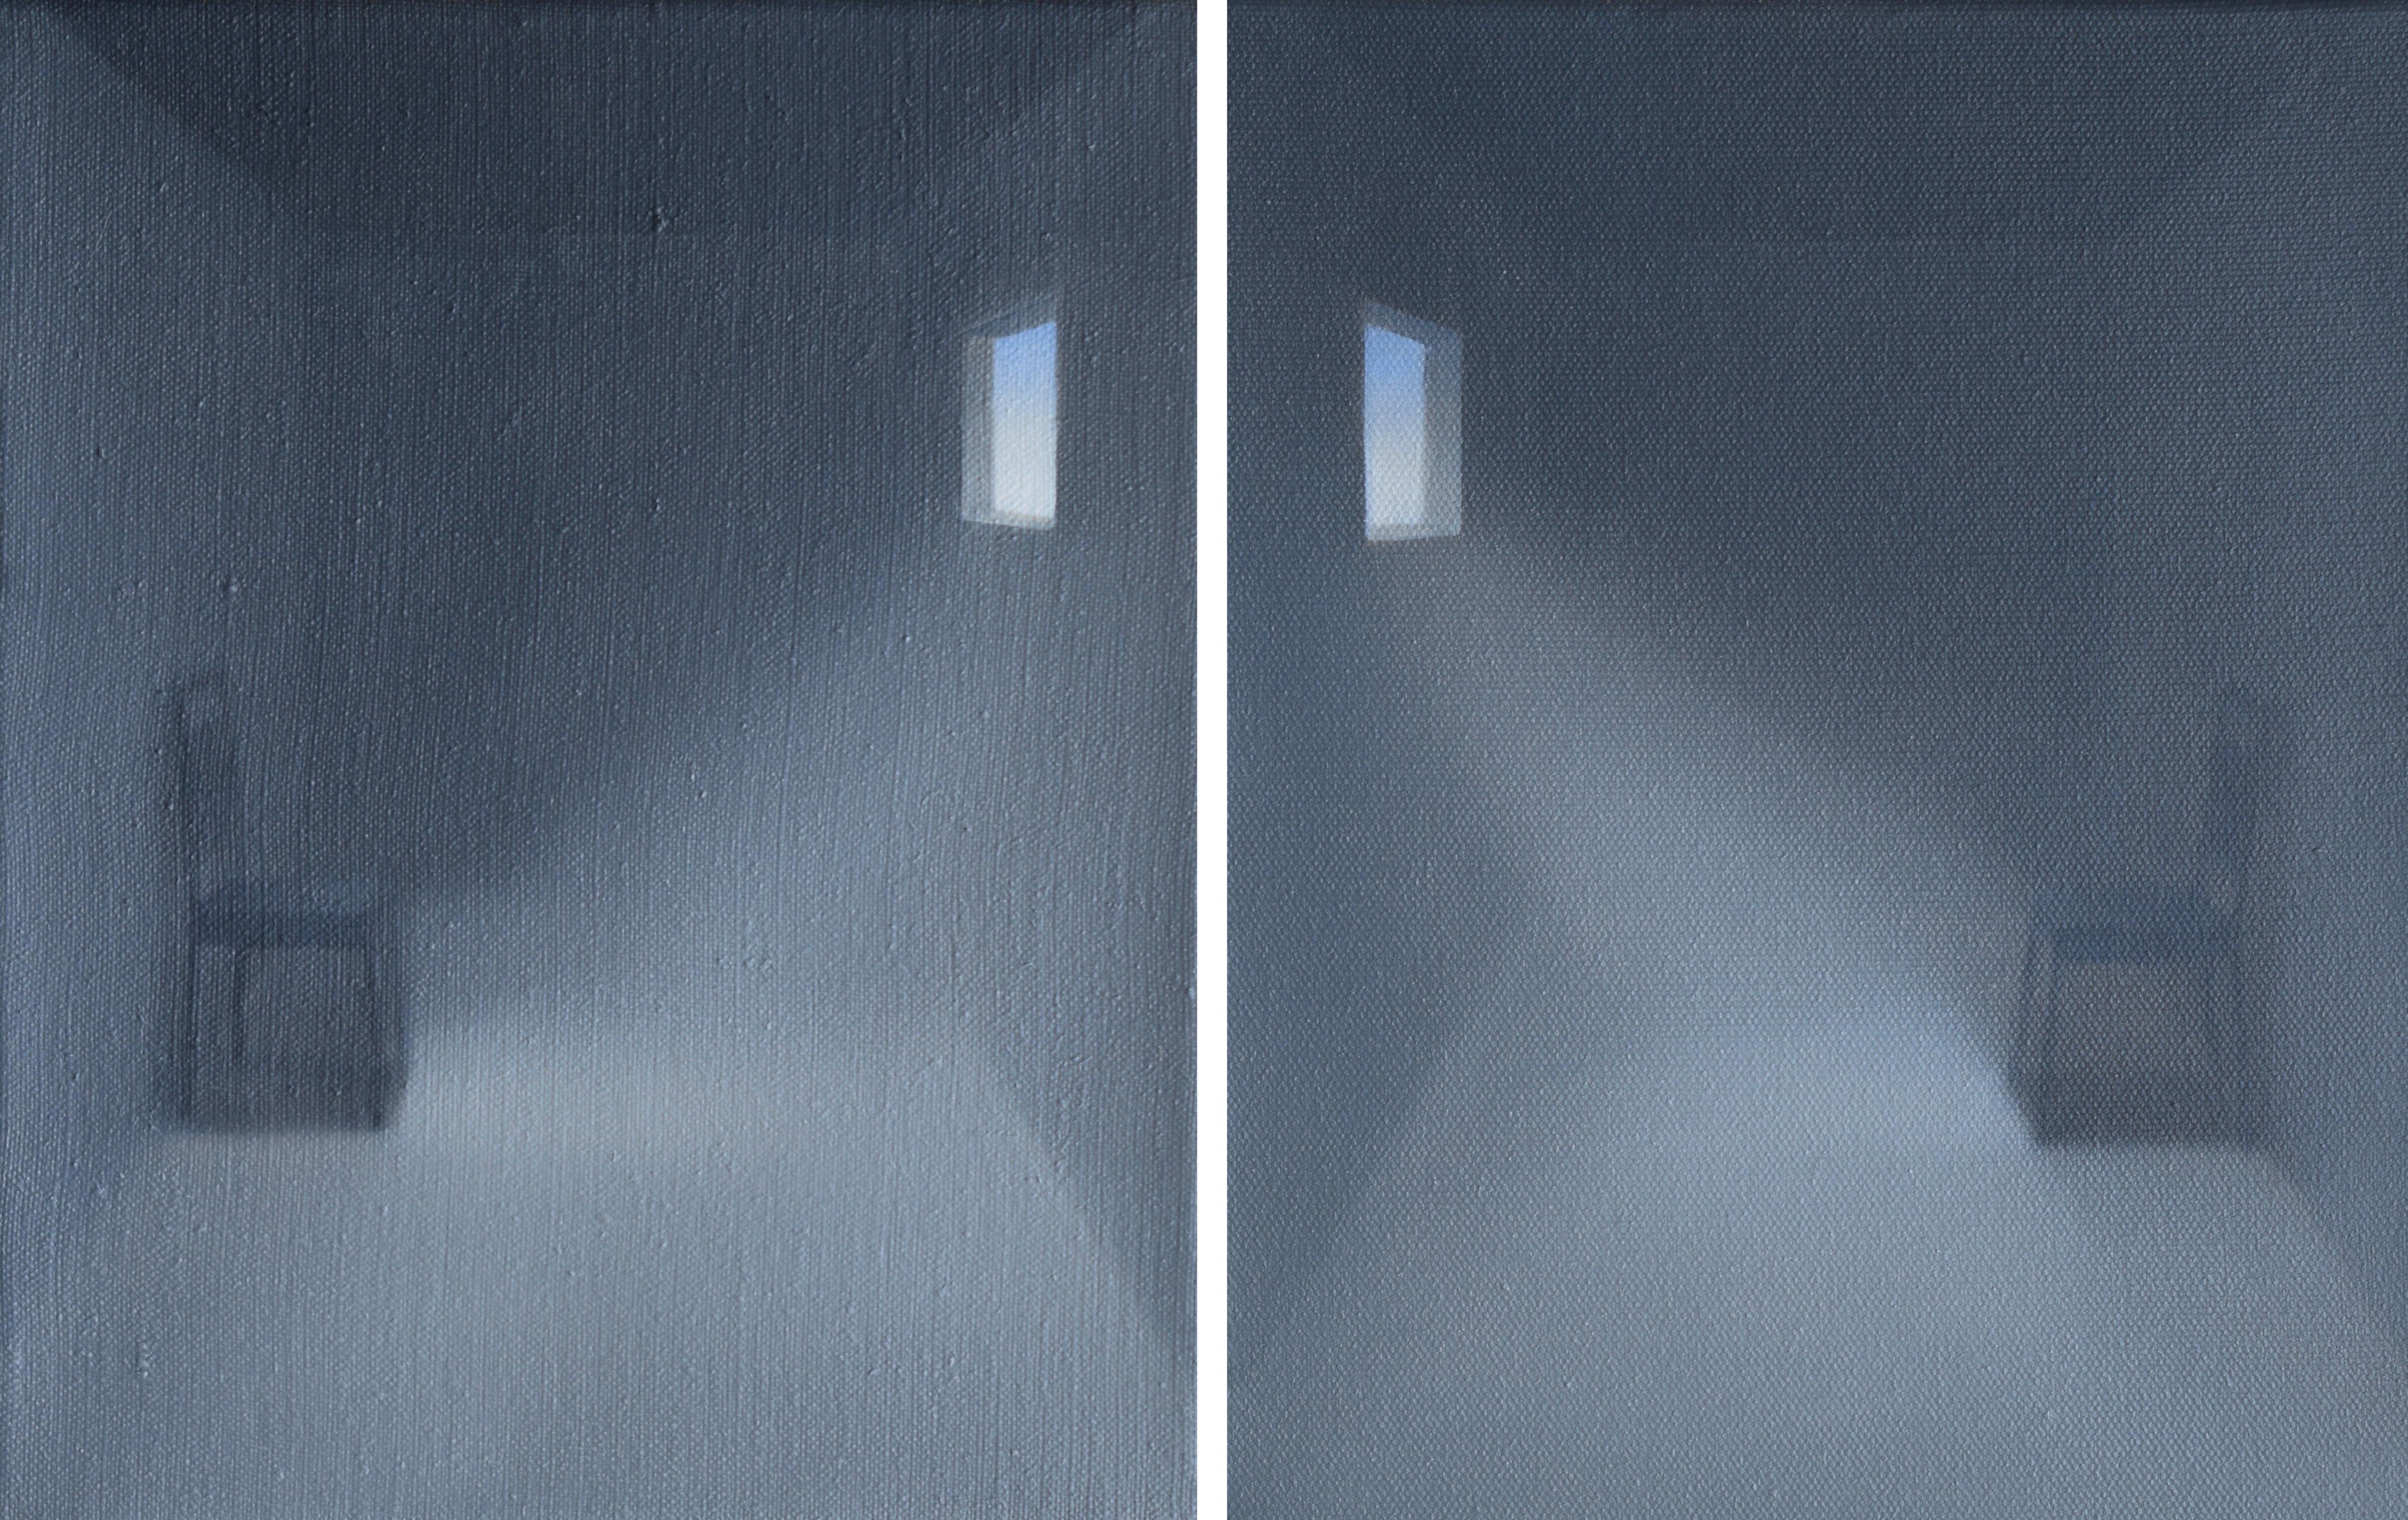 Maggie Evans Figurative Painting - Separate Duality (diptych)